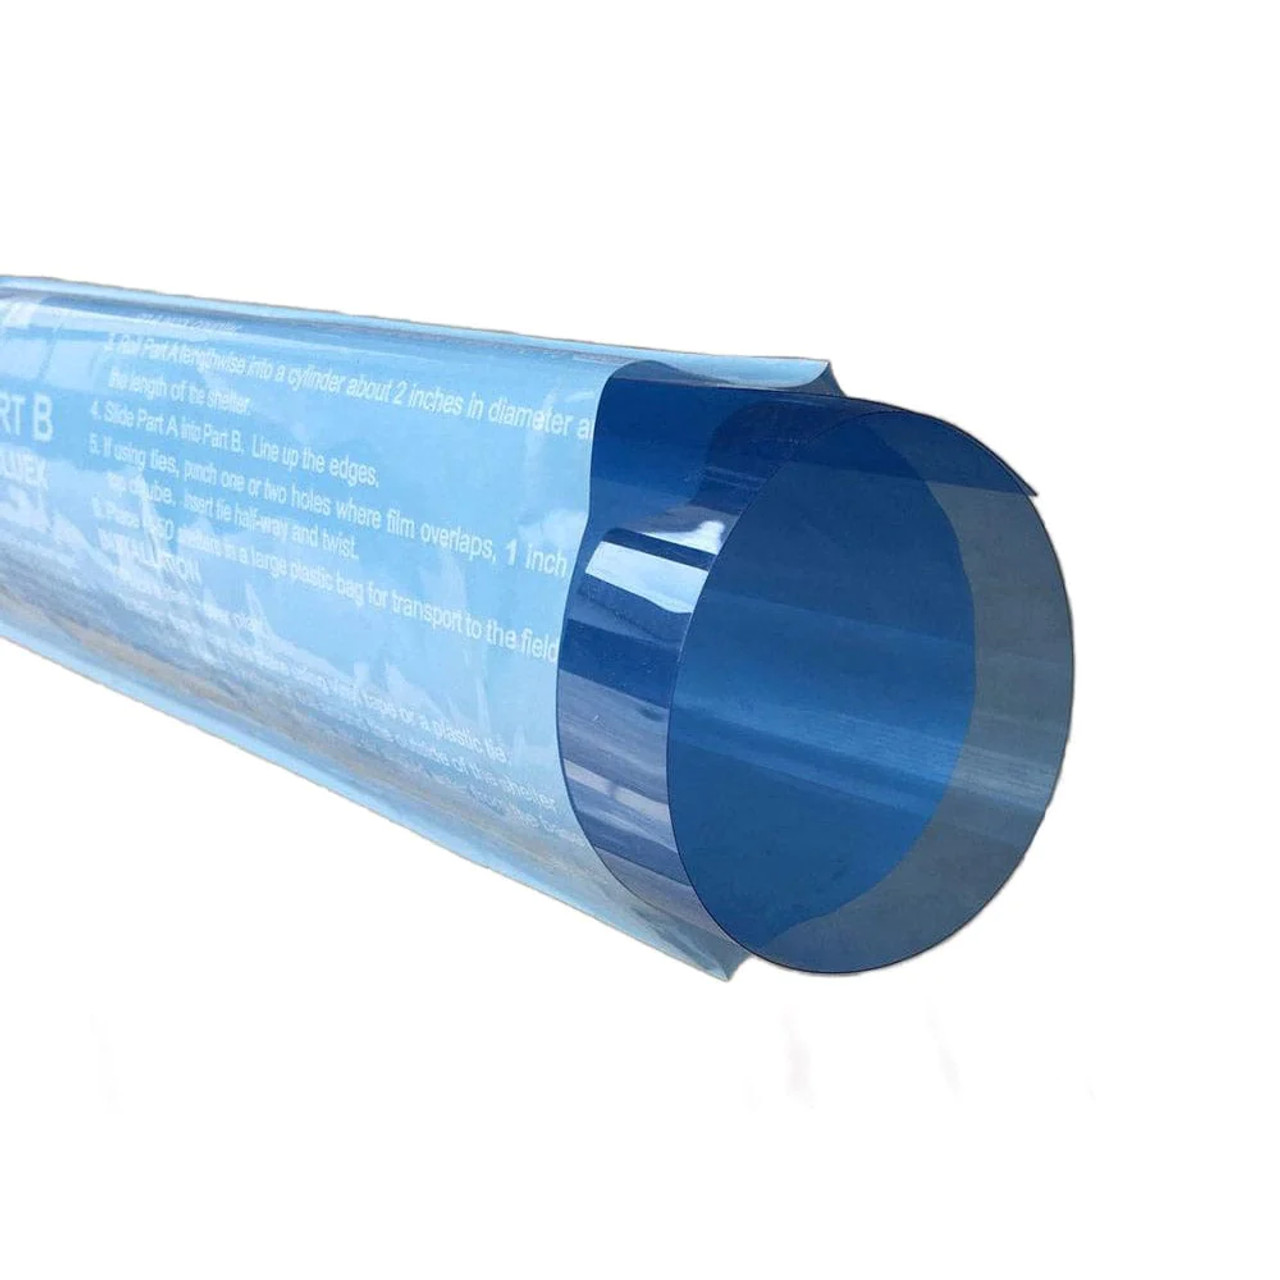 The Blue-X grow tube consists of two pieces: the inner sleeve (PART-A) and the one-time use outer bag (PART-B).